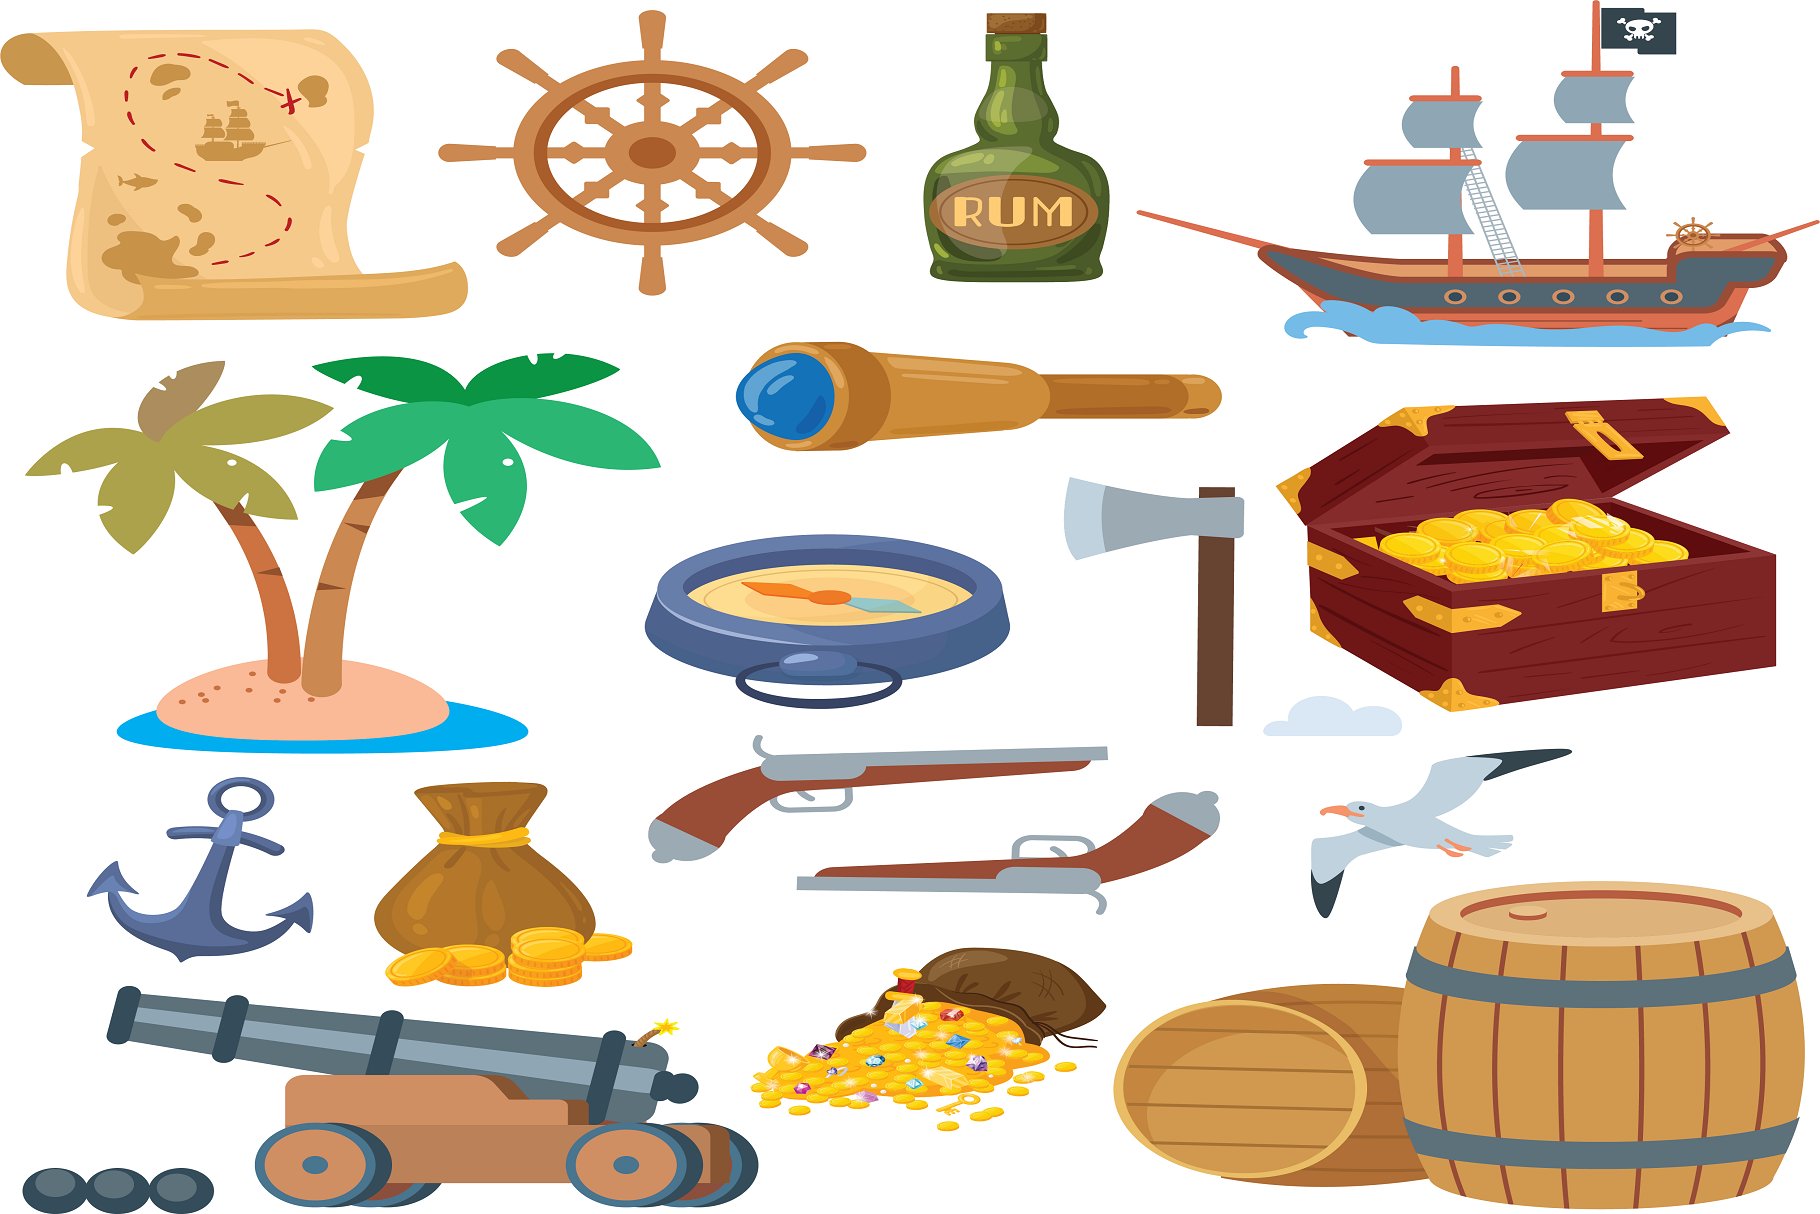 Realistic elements for the pirate illustration.